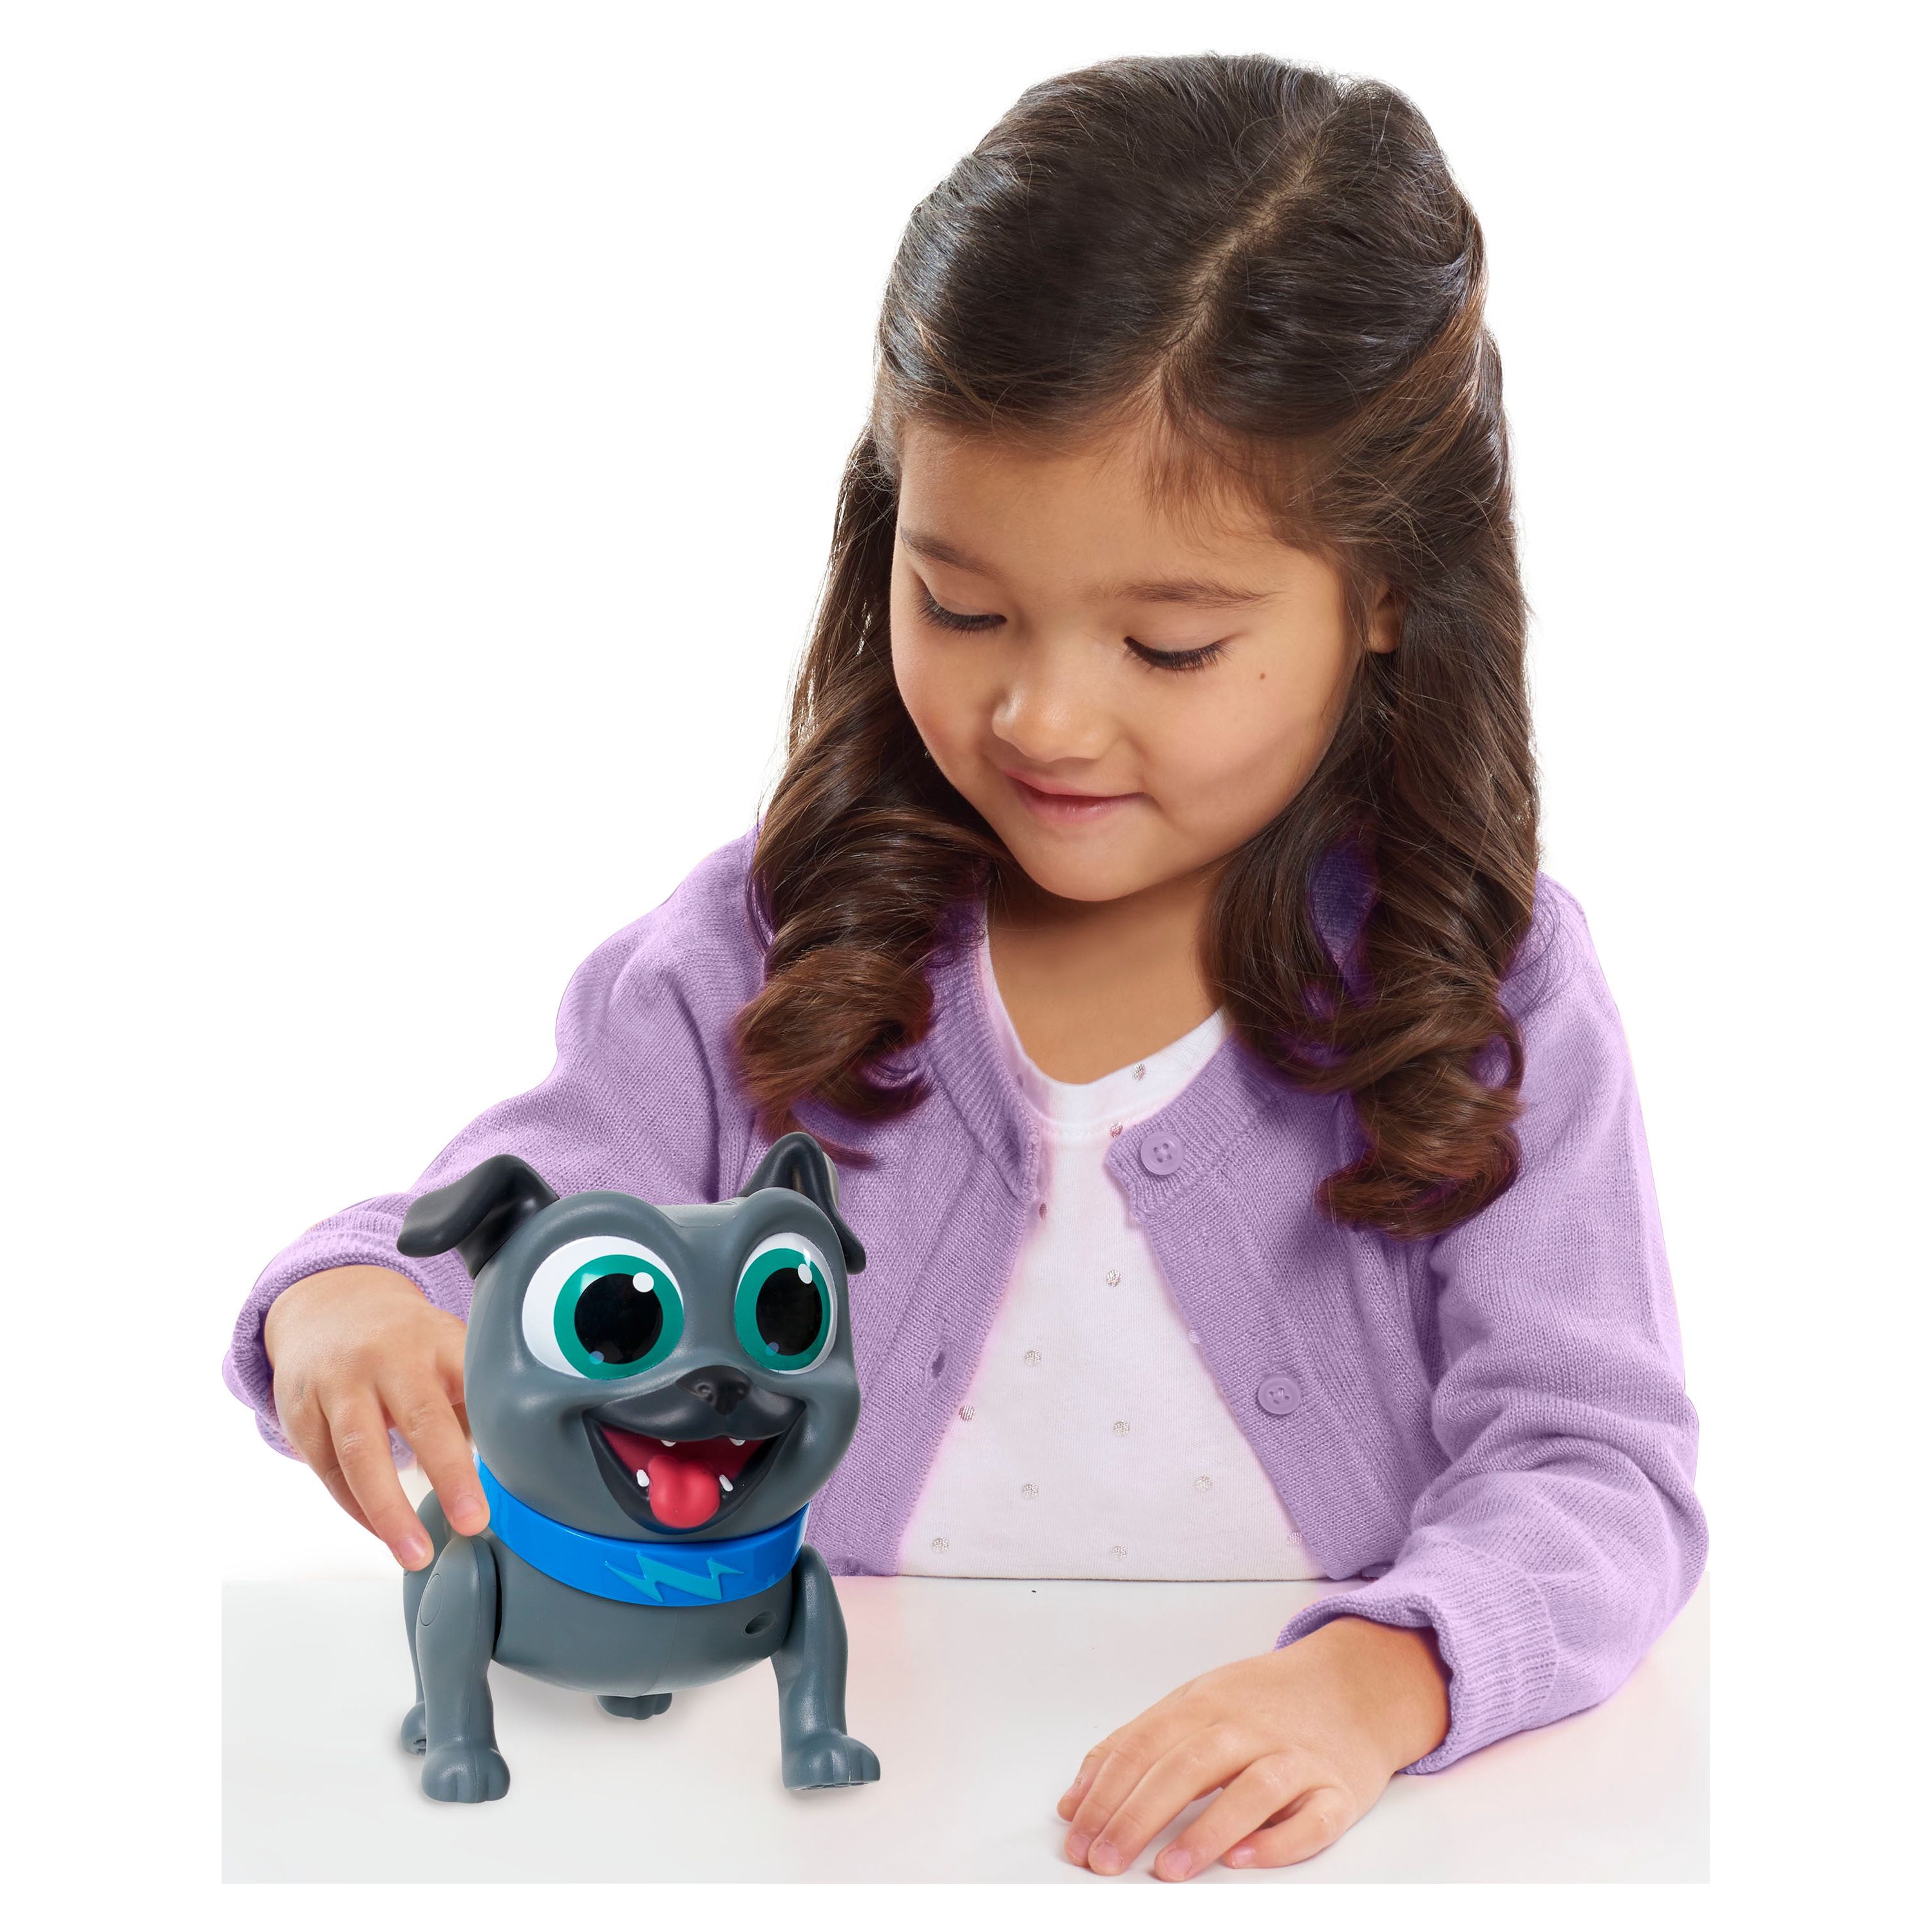 Puppy Dog Pals Surprise Action Figure, Bingo, Officially Licensed Kids Toys for Ages 3 Up, Gifts and Presents - image 3 of 6